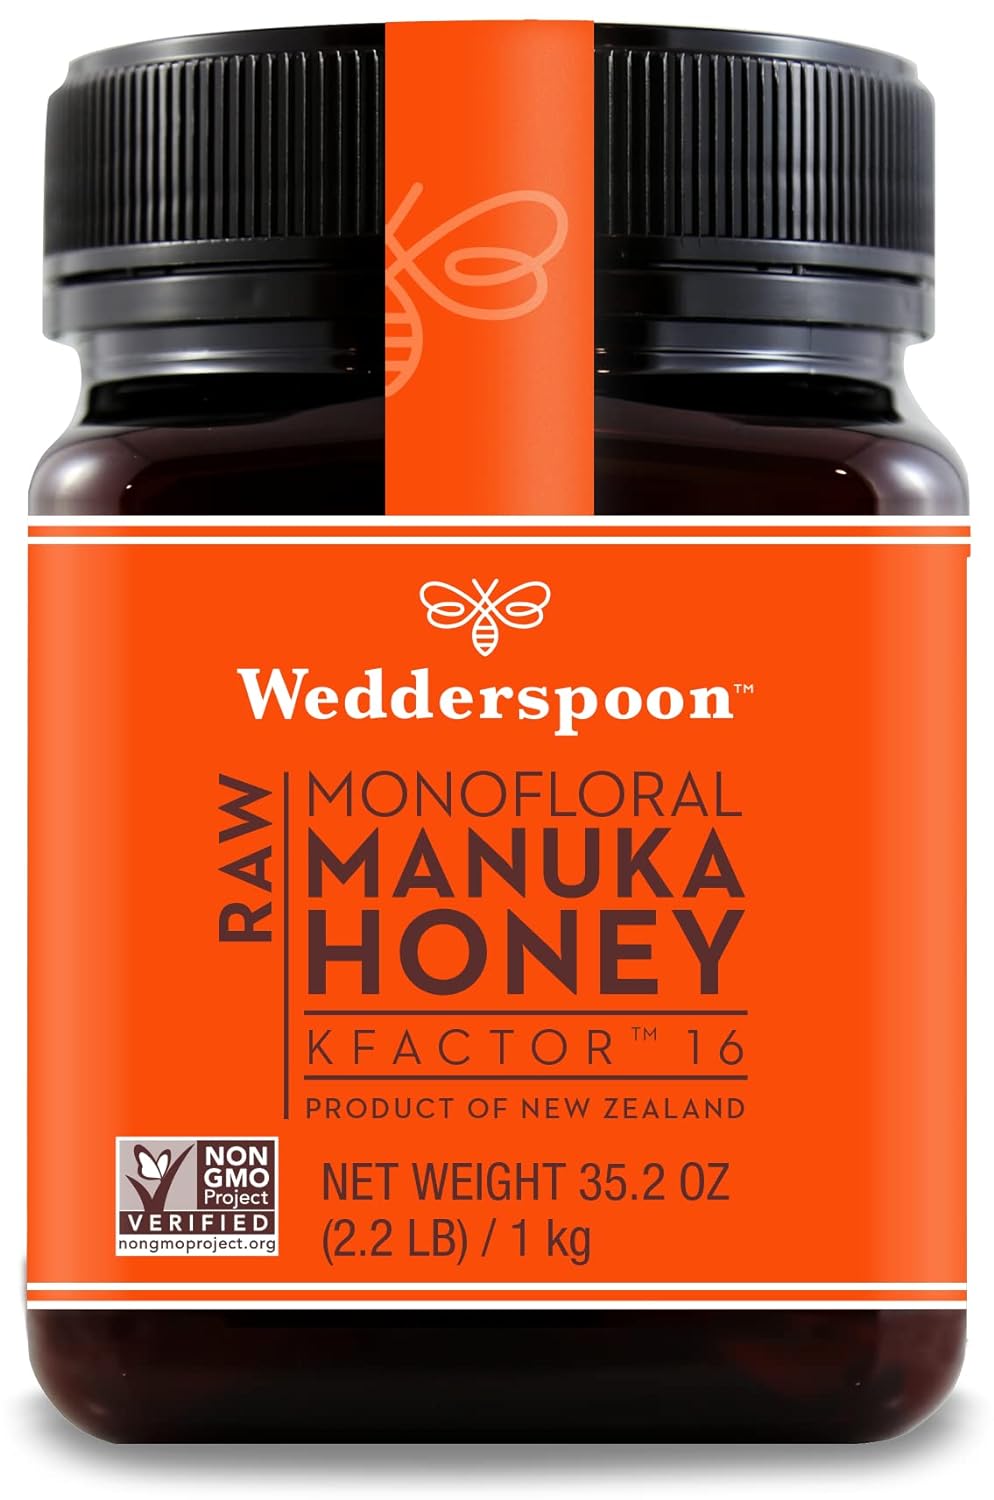 Wedderspoon Raw Premium Manuka Honey, KFactor 16, 35.2 Oz, Unpasteurized, Genuine New Zealand Honey, Traceable From Our Hives To Your Home